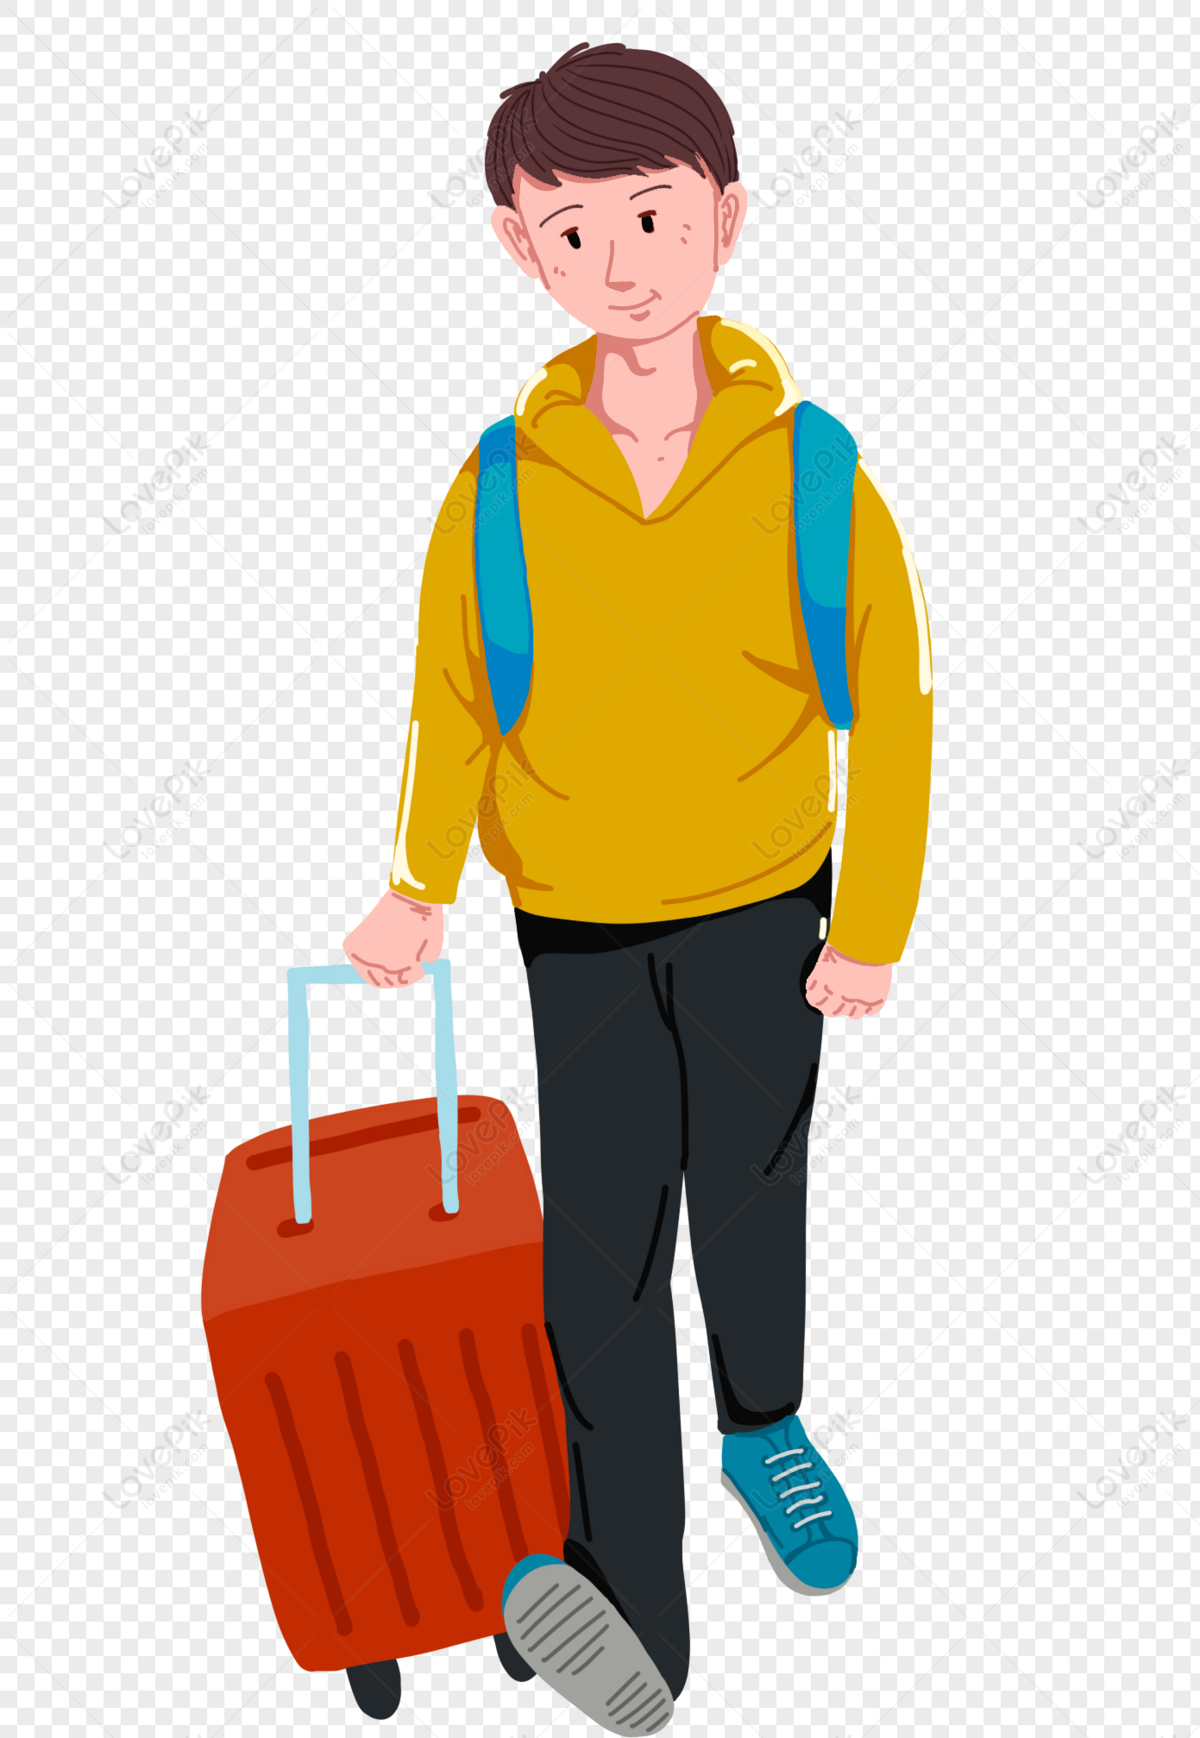 Take the luggage home Boy, backpack boy, boy holding, red suitcase png free download